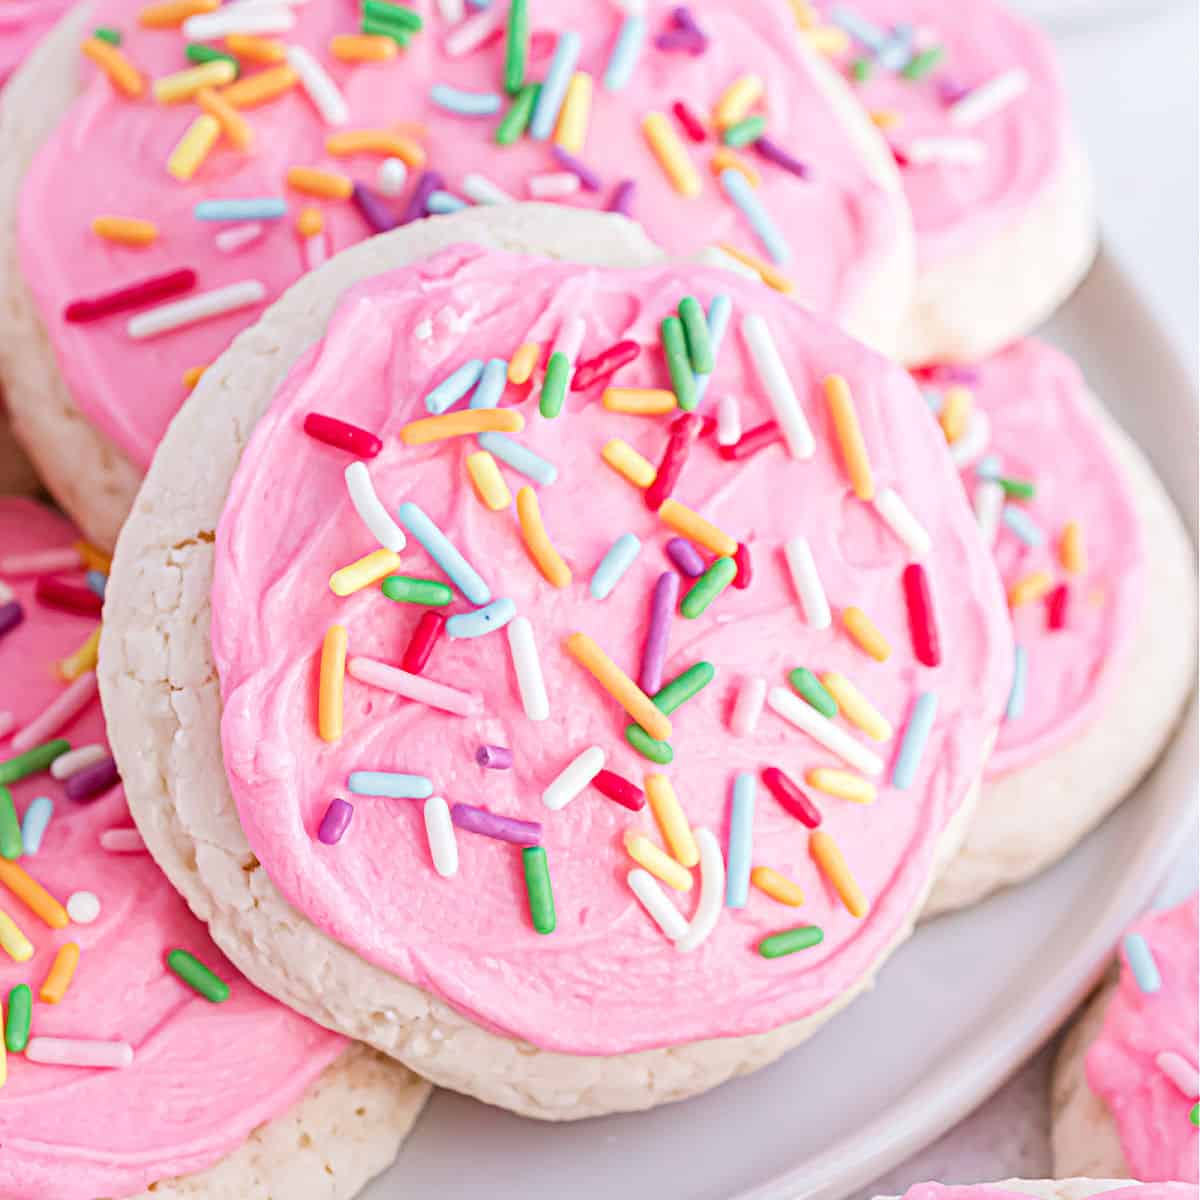 Stack of homemade lofthouse cookies with pink frosting on a white plate.